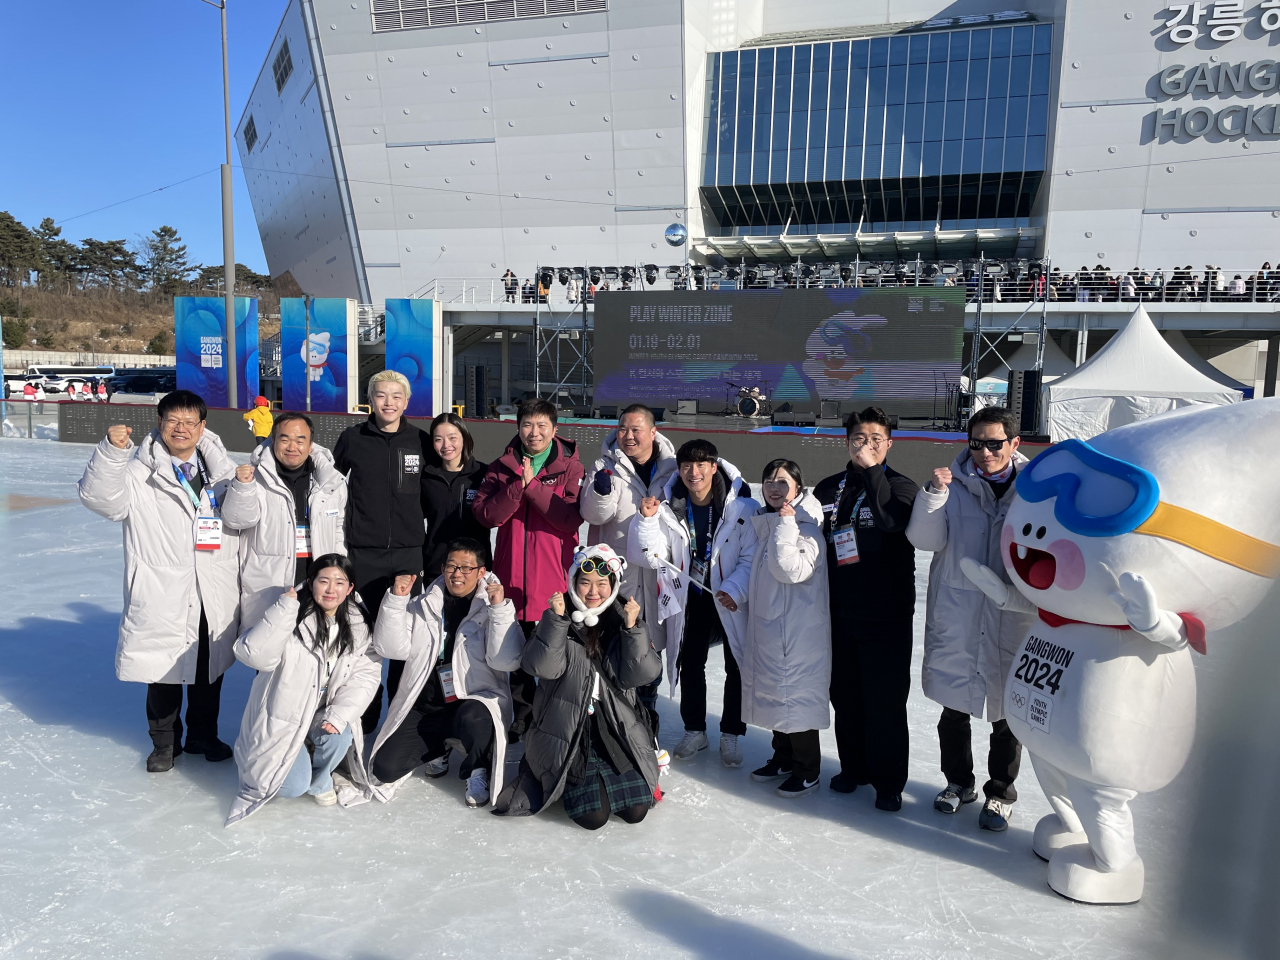 Alex Hideo Shibutani (second row, third from left) and Maia Harumi Shibutani (fourth from left) pose for photos with staff of the PyeongChang 2018 Legacy Foundation on Jan. 25 at Gangneung Hockey Centre in Gangneung, Gangwon Province. (PyeongChang 2018 Legacy Foundation)